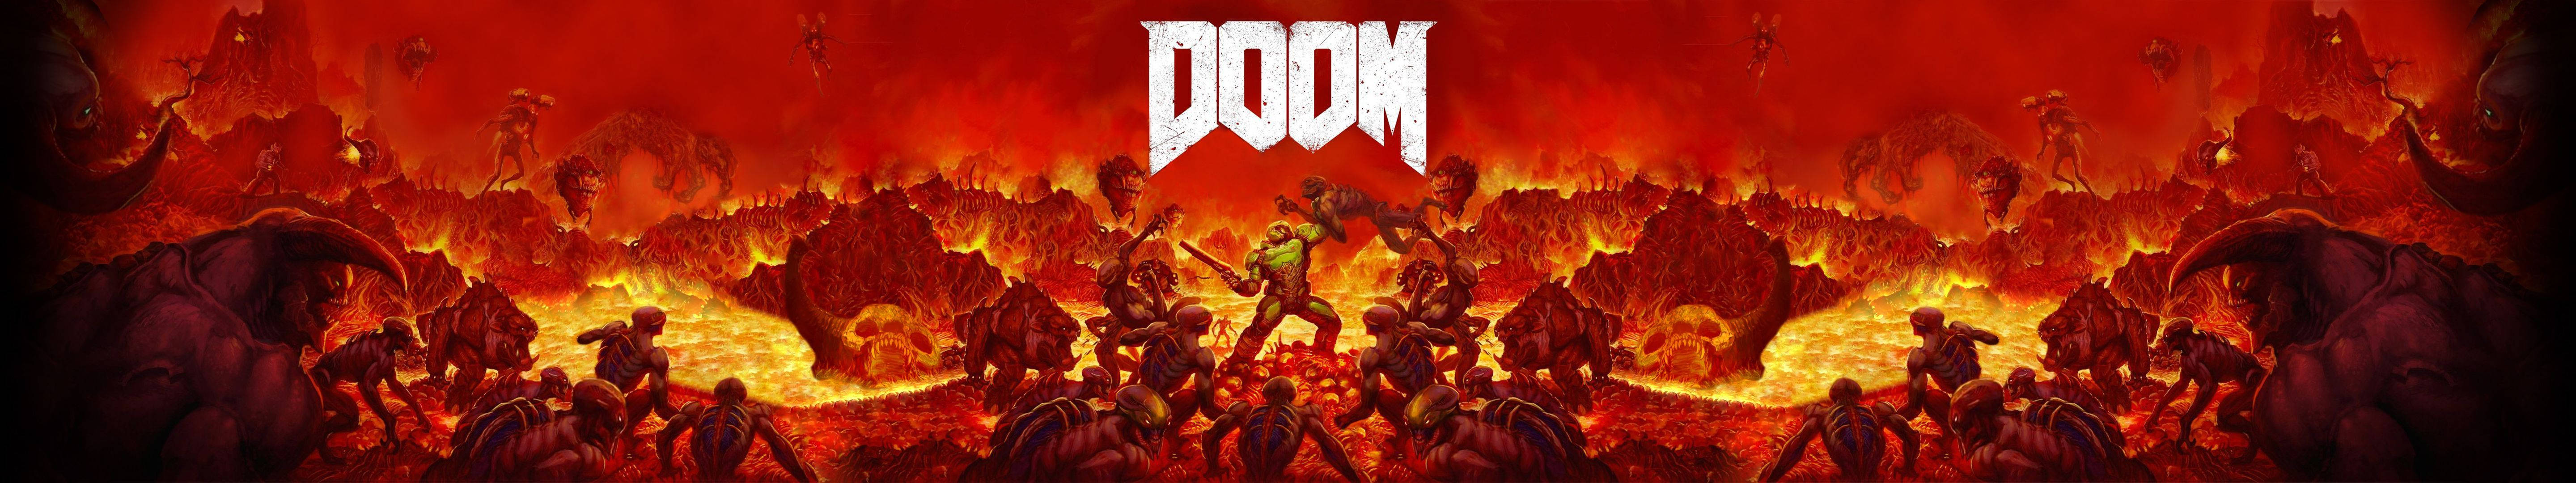 Doom - the ultimate challenge in intense, sci-fi first-person shooting Wallpaper